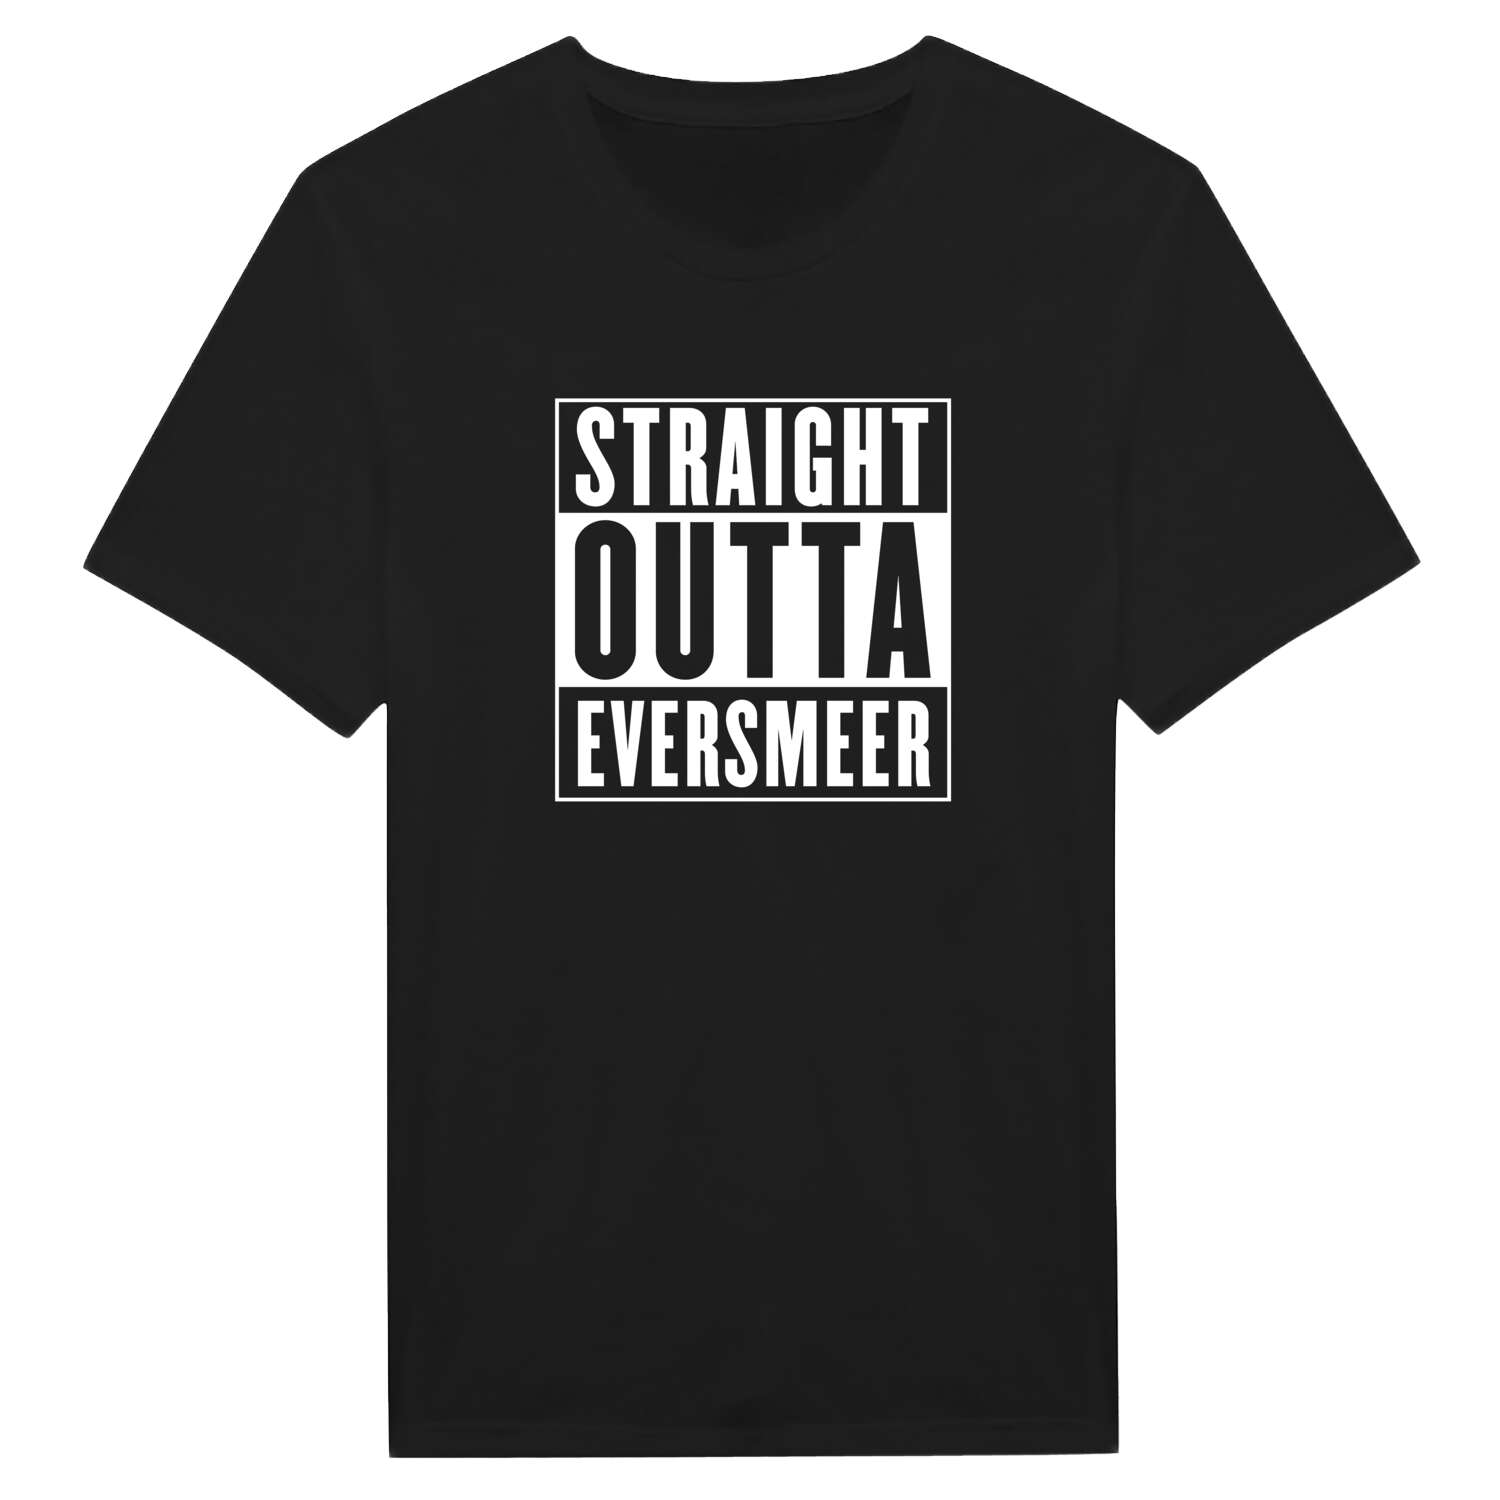 Eversmeer T-Shirt »Straight Outta«